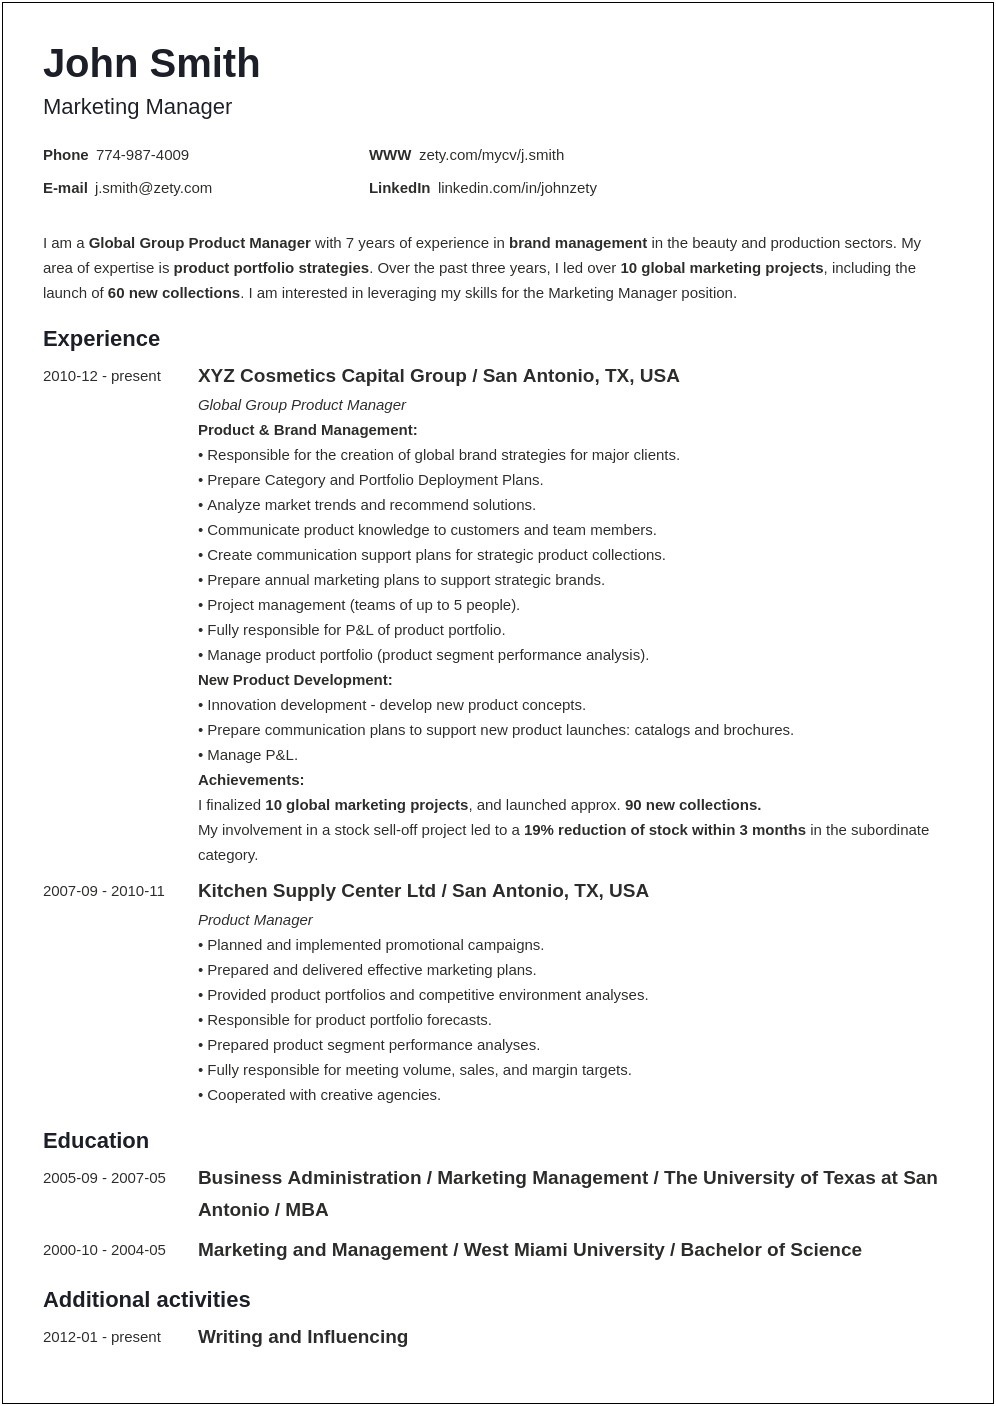 Skills For An Education Resume